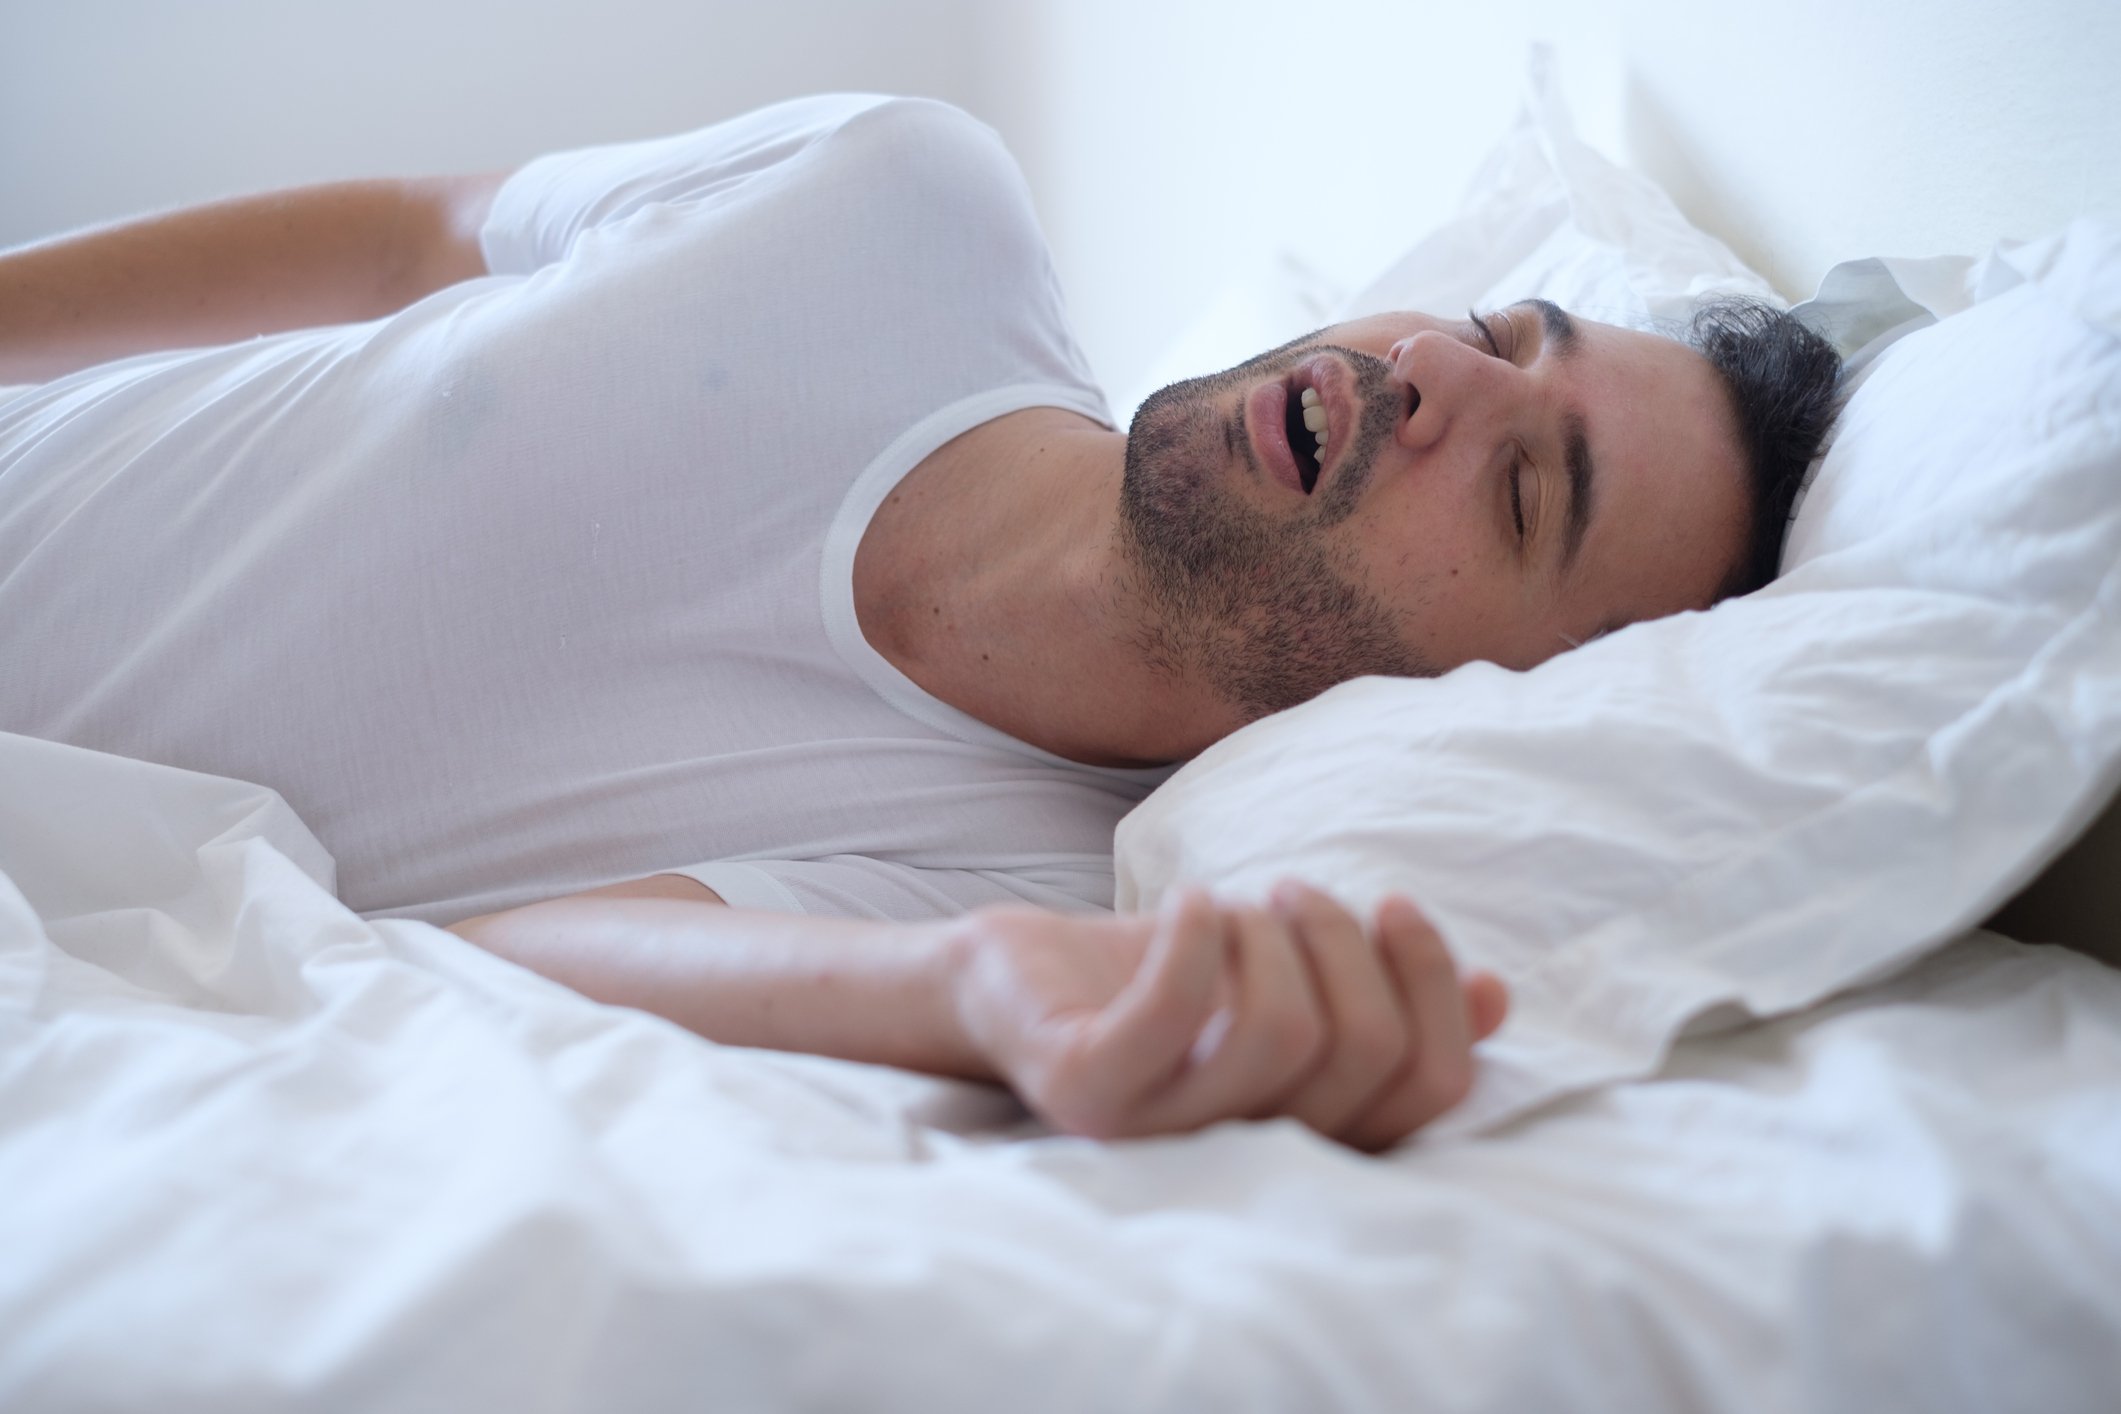 Snoring: The Causes, Dangers, & Treatment Options